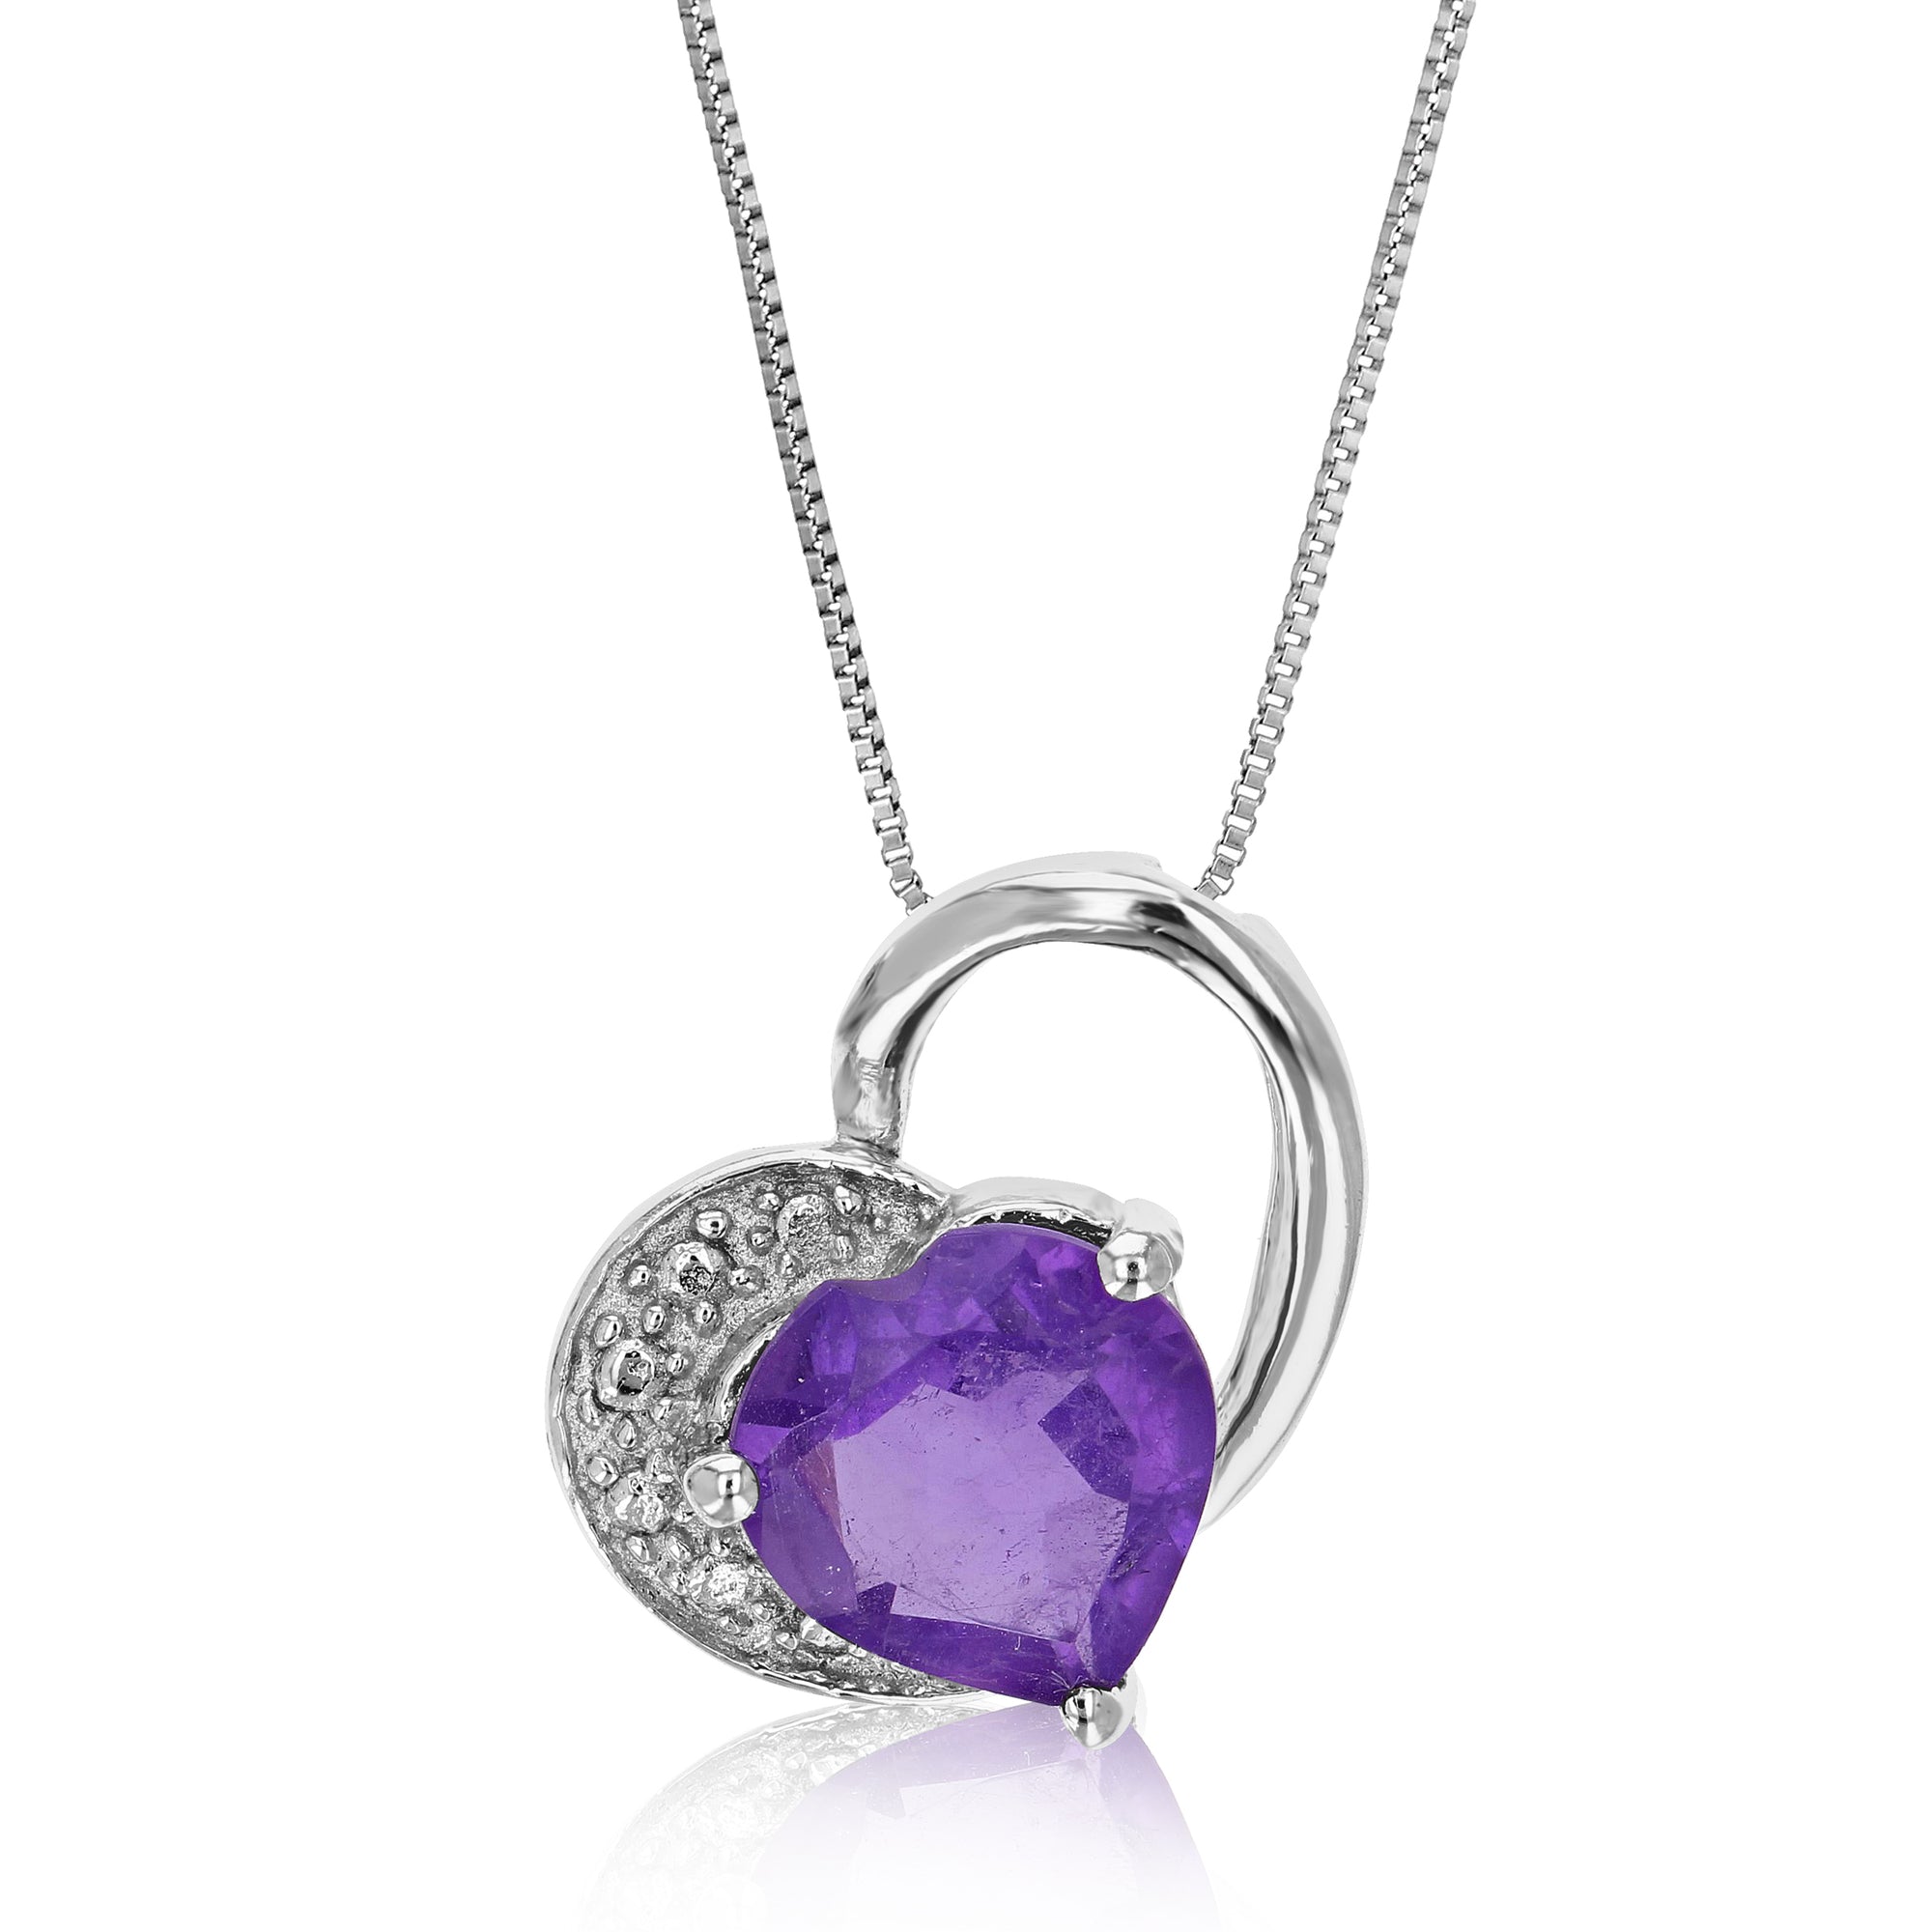 1 cttw Pendant Necklace, Purple Amethyst Heart Pendant Necklace for Women in .925 Sterling Silver with Rhodium, 18 Inch Chain, Prong Setting